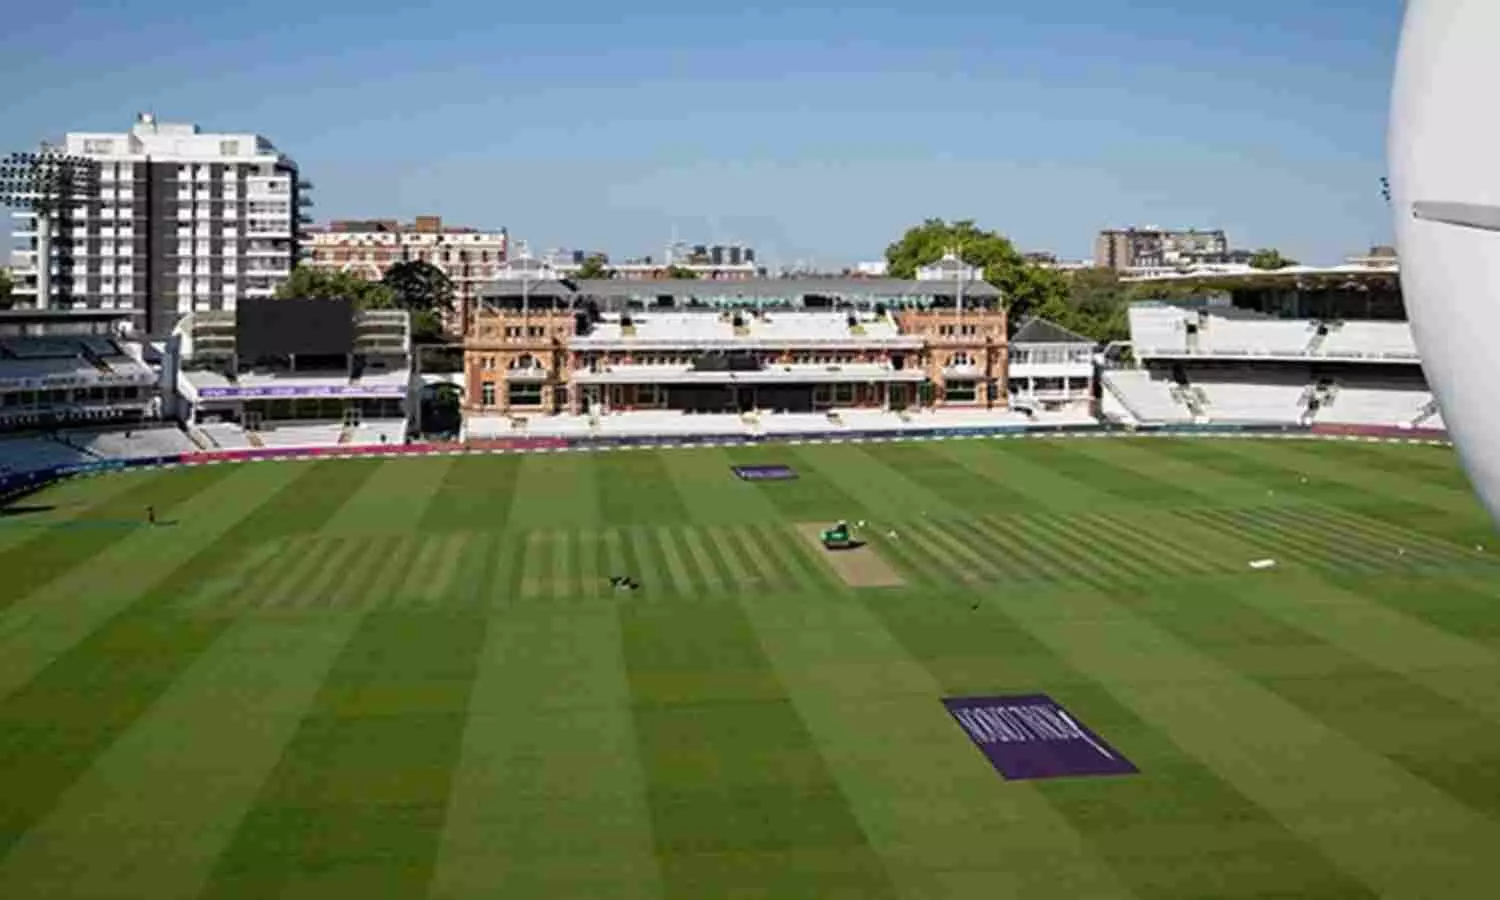 Lords will Host ICC World Test Championship Final in 2023 and 2025